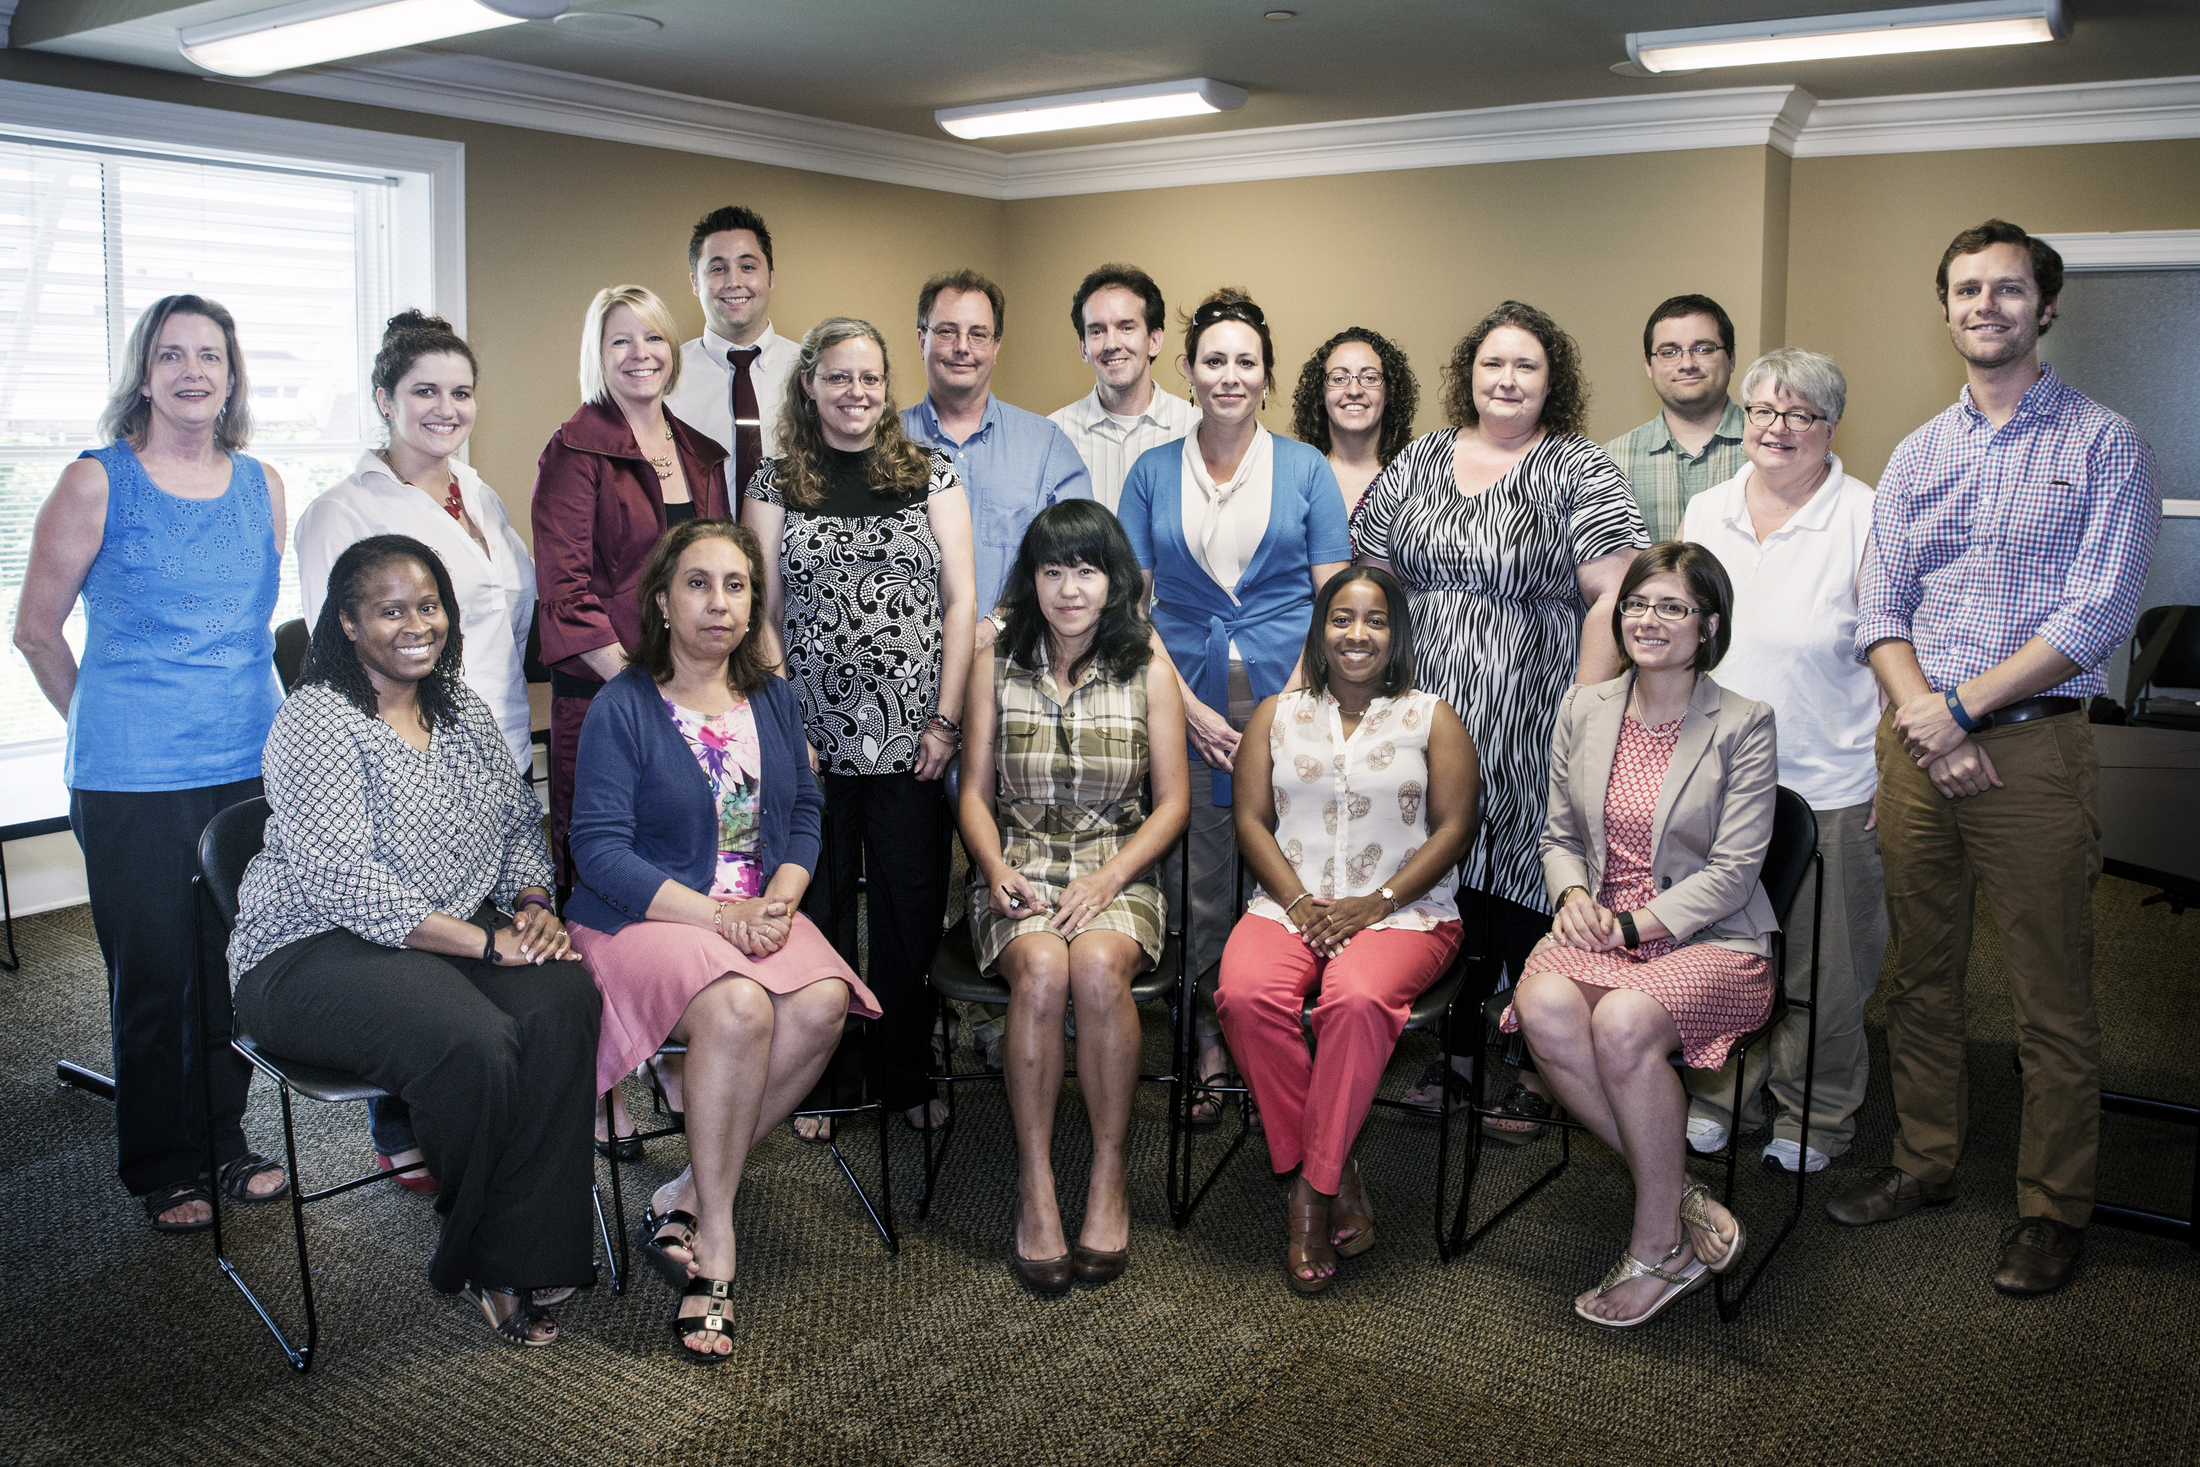 Fourteen MSU faculty members are new graduates of a summer program designed to help them better incorporate writing strategies into class assignments. They include (seated, l-r) Kristina Hood, Rosa Vozzo, Yuhua Farnell, Melody Fisher and Carmen Wilder; (standing, l-r) institute co-director Ann Spurlock, writing coordinator Chelsea Henshaw, Melissa Moore, Daniel Gadke, Athena Nagel, Donald Grebner, James Kelley, Christa Haney, Wendy Herd, Lori Elmore-Staton, and Ryan Ross. With them are (standing, far right), institute co-director Deborah Lee and writing coordinator Ed Dechert.